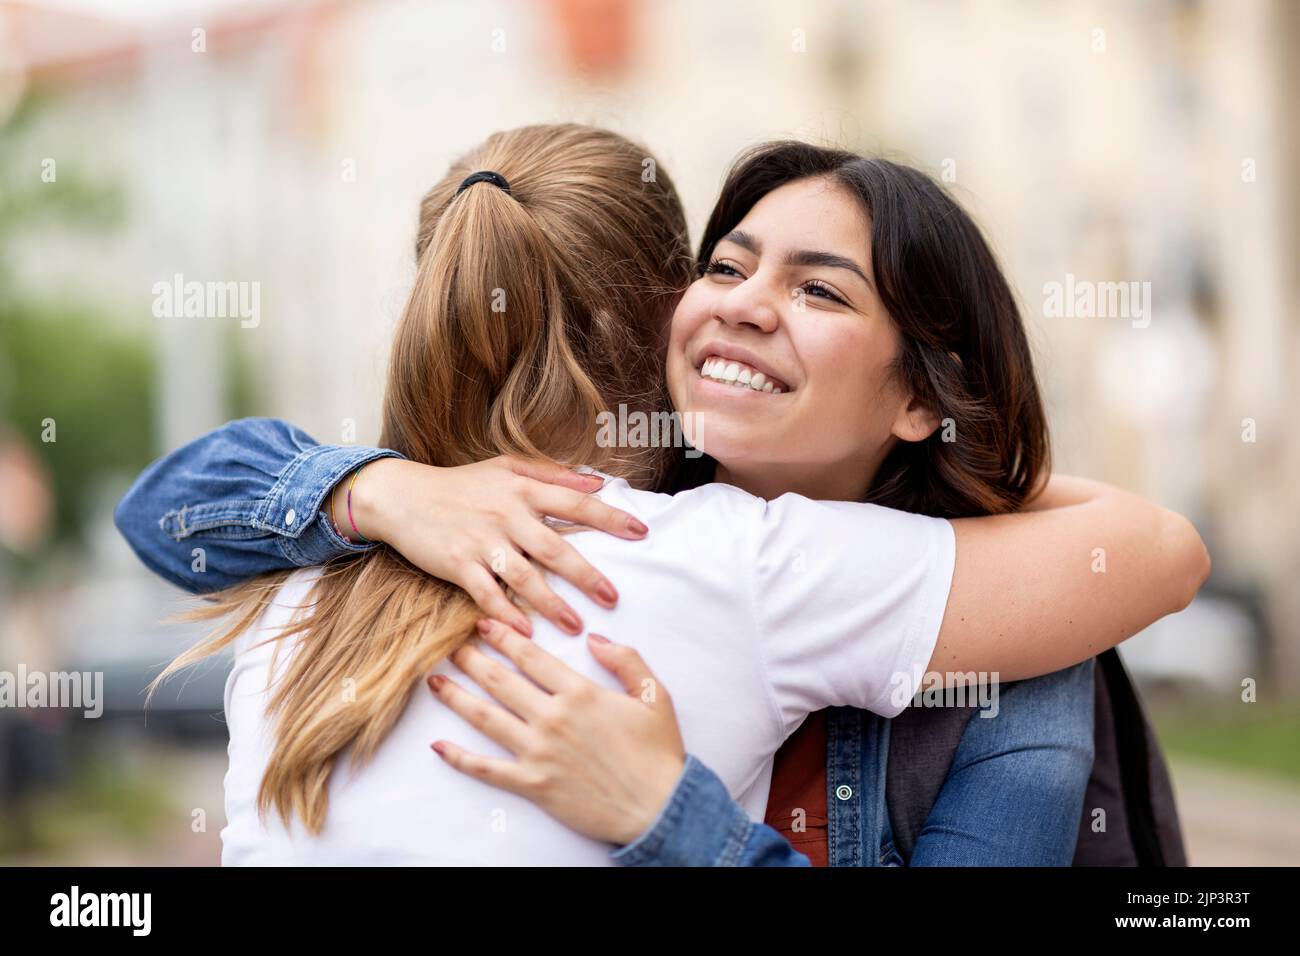 Friendship Concept. Two Happy Young Female Friends Embracing Outdoors On City Street Stock Photo